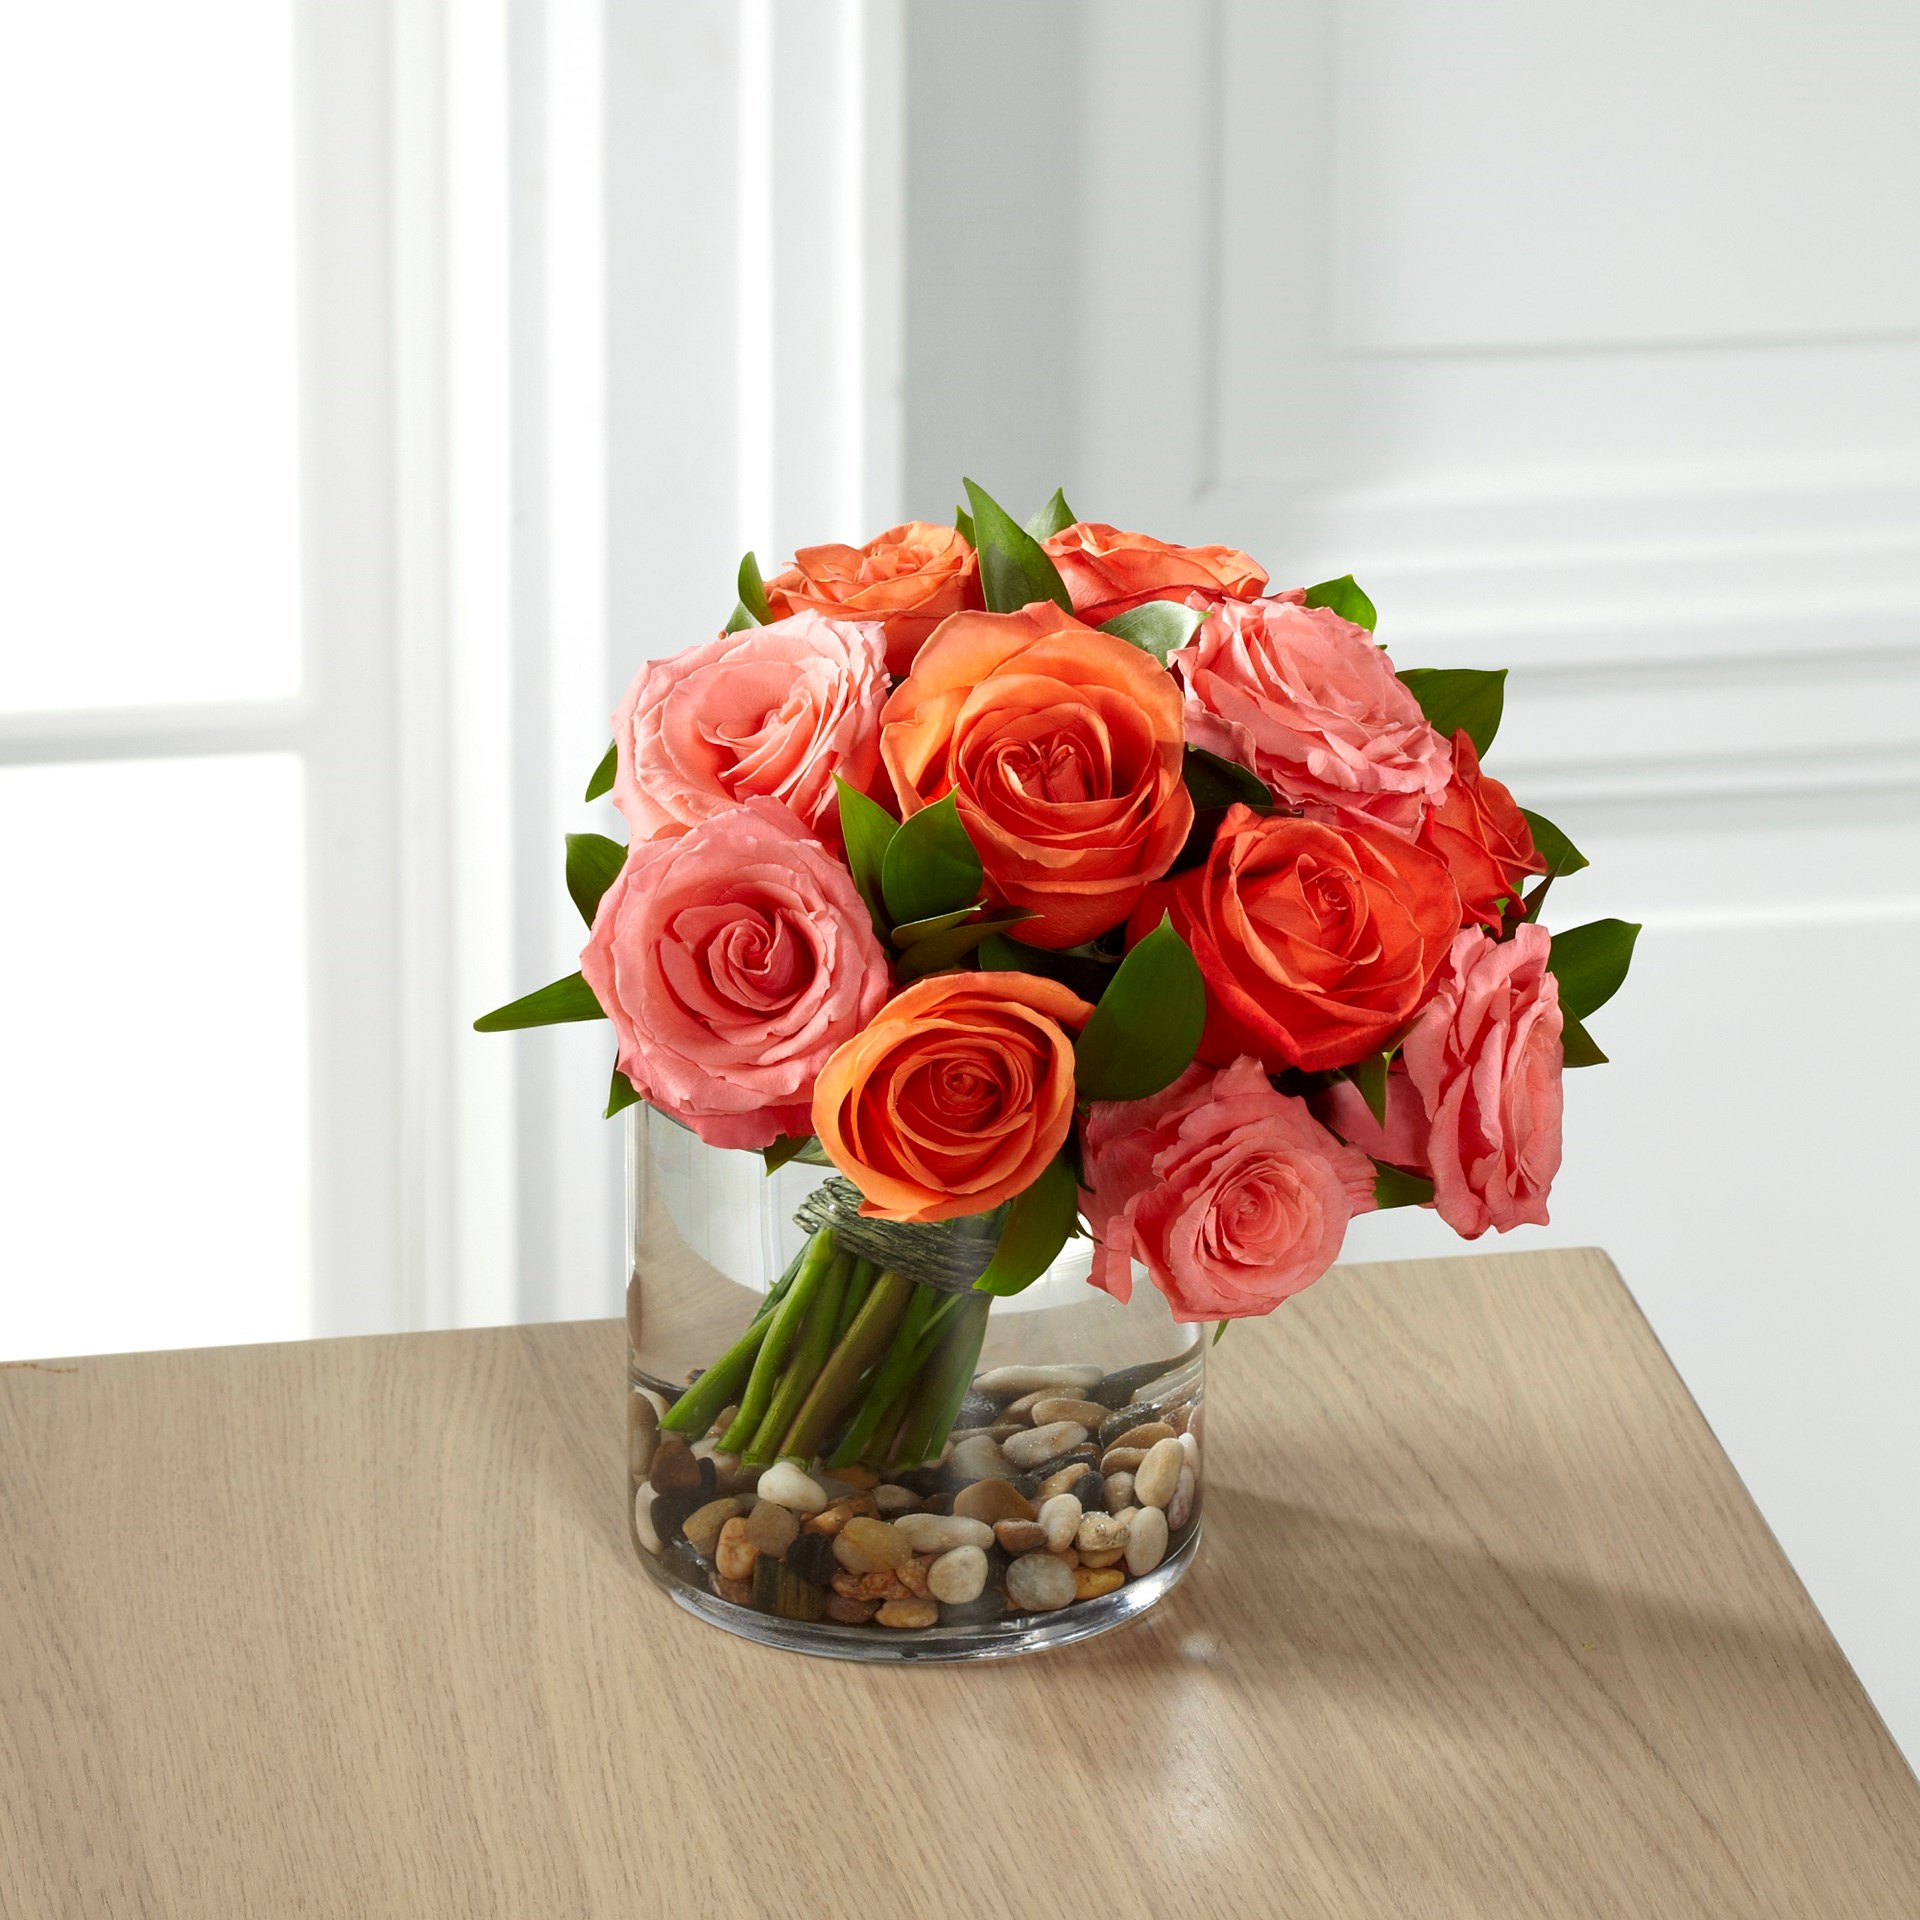 product image for The FTD Blazing Beauty Rose Bouquet